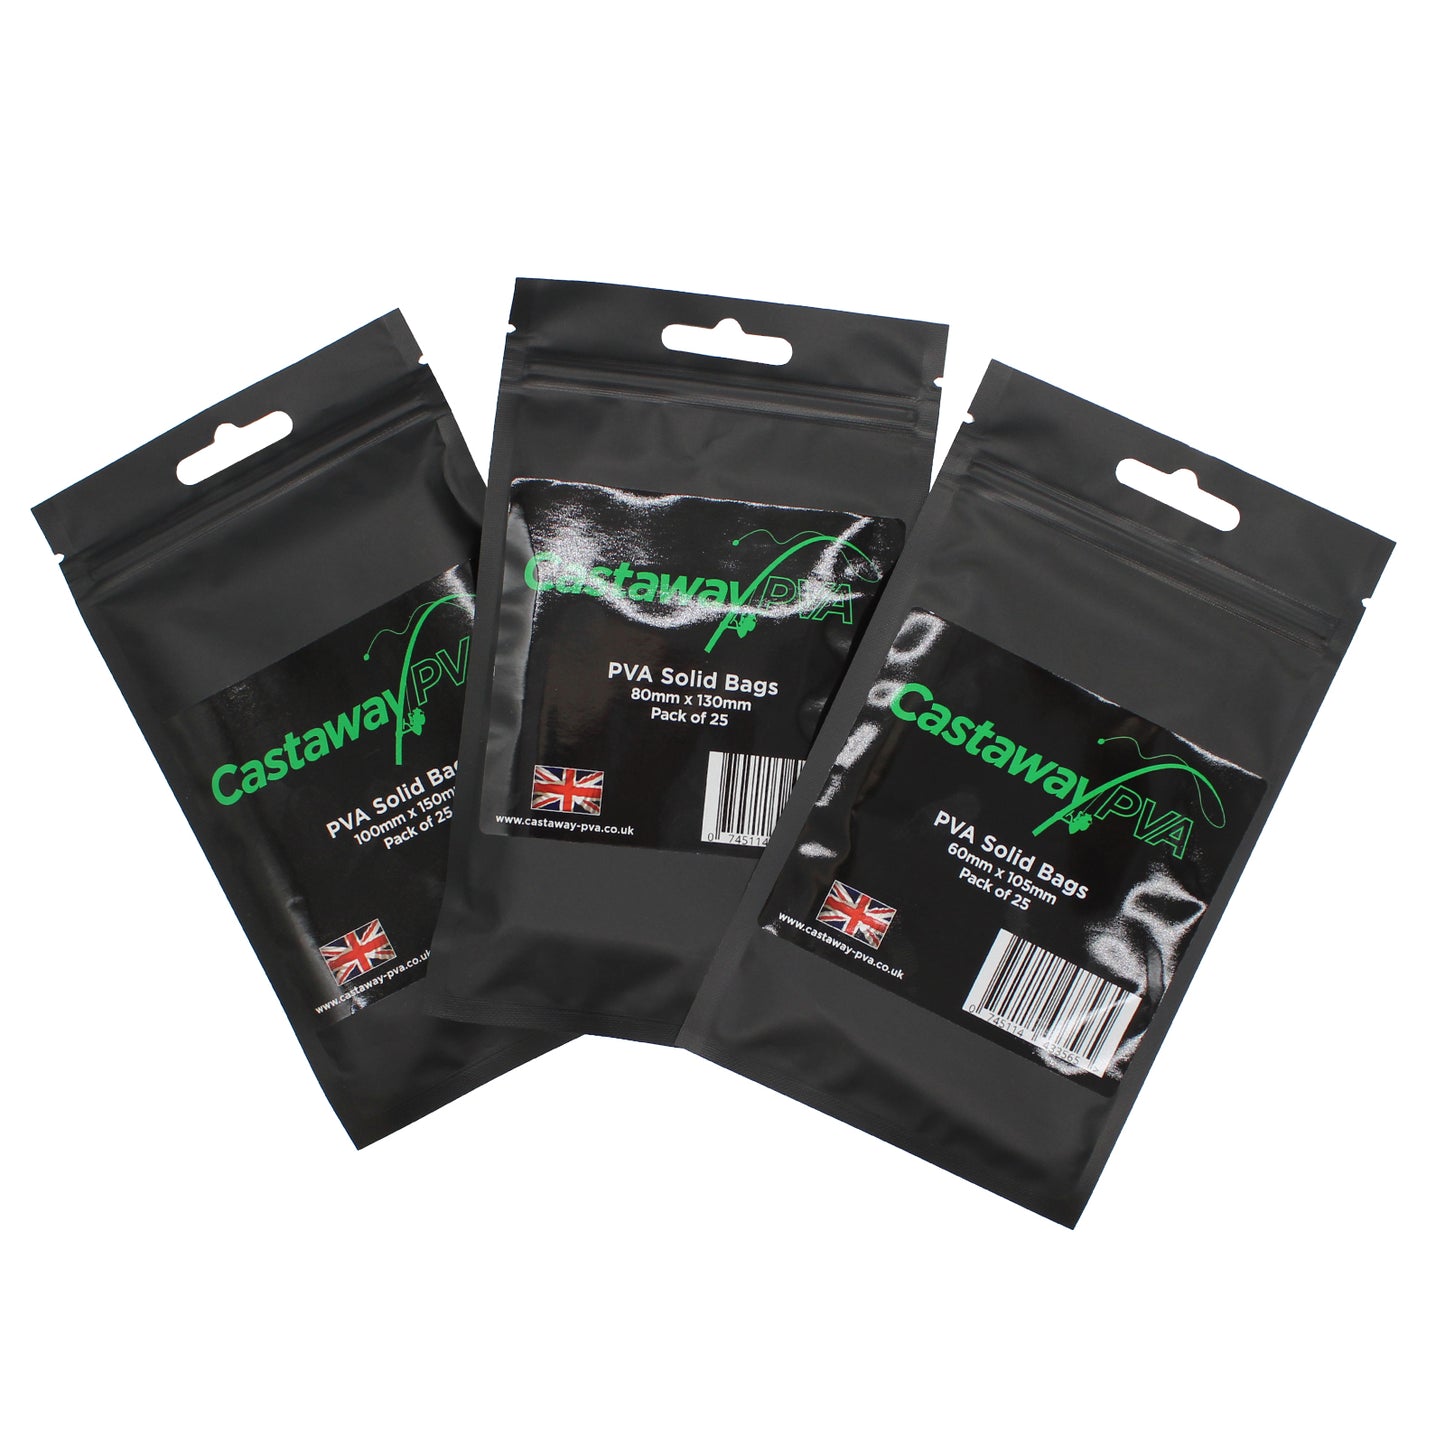 Castaway PVA Solid Bags in Three Sizes